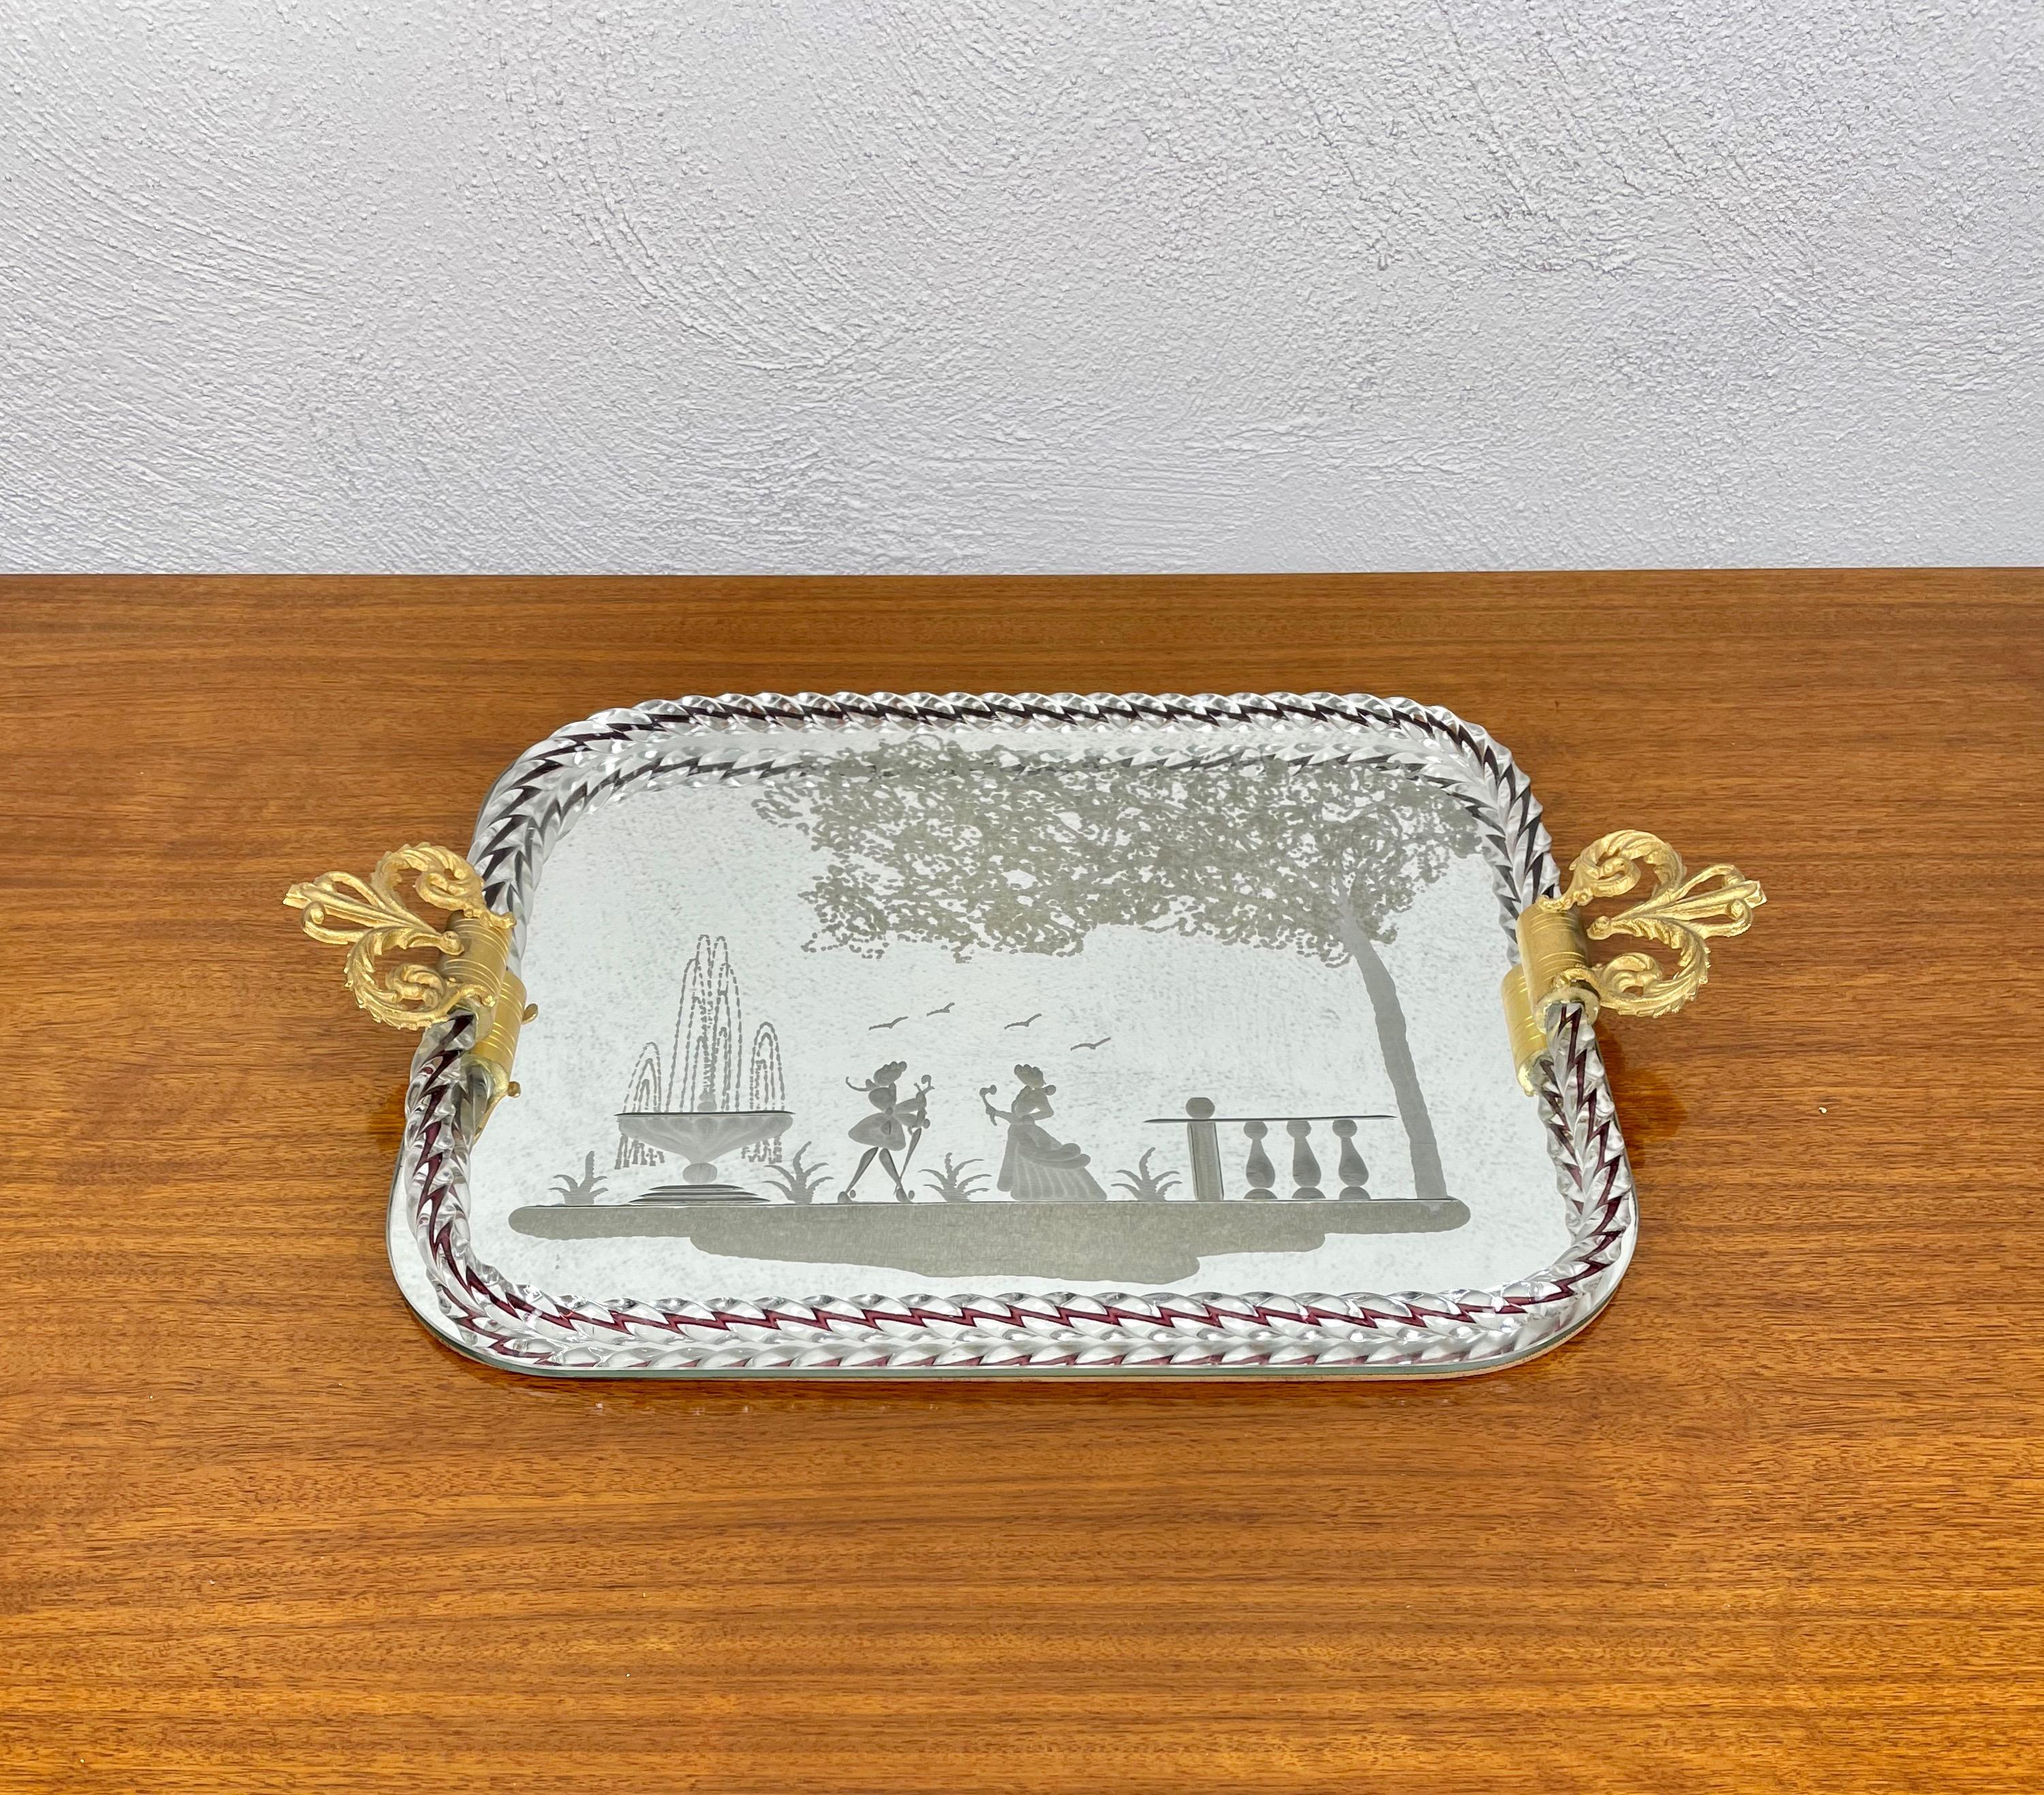 Midcentury mirror-engraved Murano glass serving tray. This wonderful piece was produced in Italy during 1940s by the master Murano glass-maker of Ercole Barovier. This wonderful item is a peculiar Venetian vintage tray with a mirror base and gilded